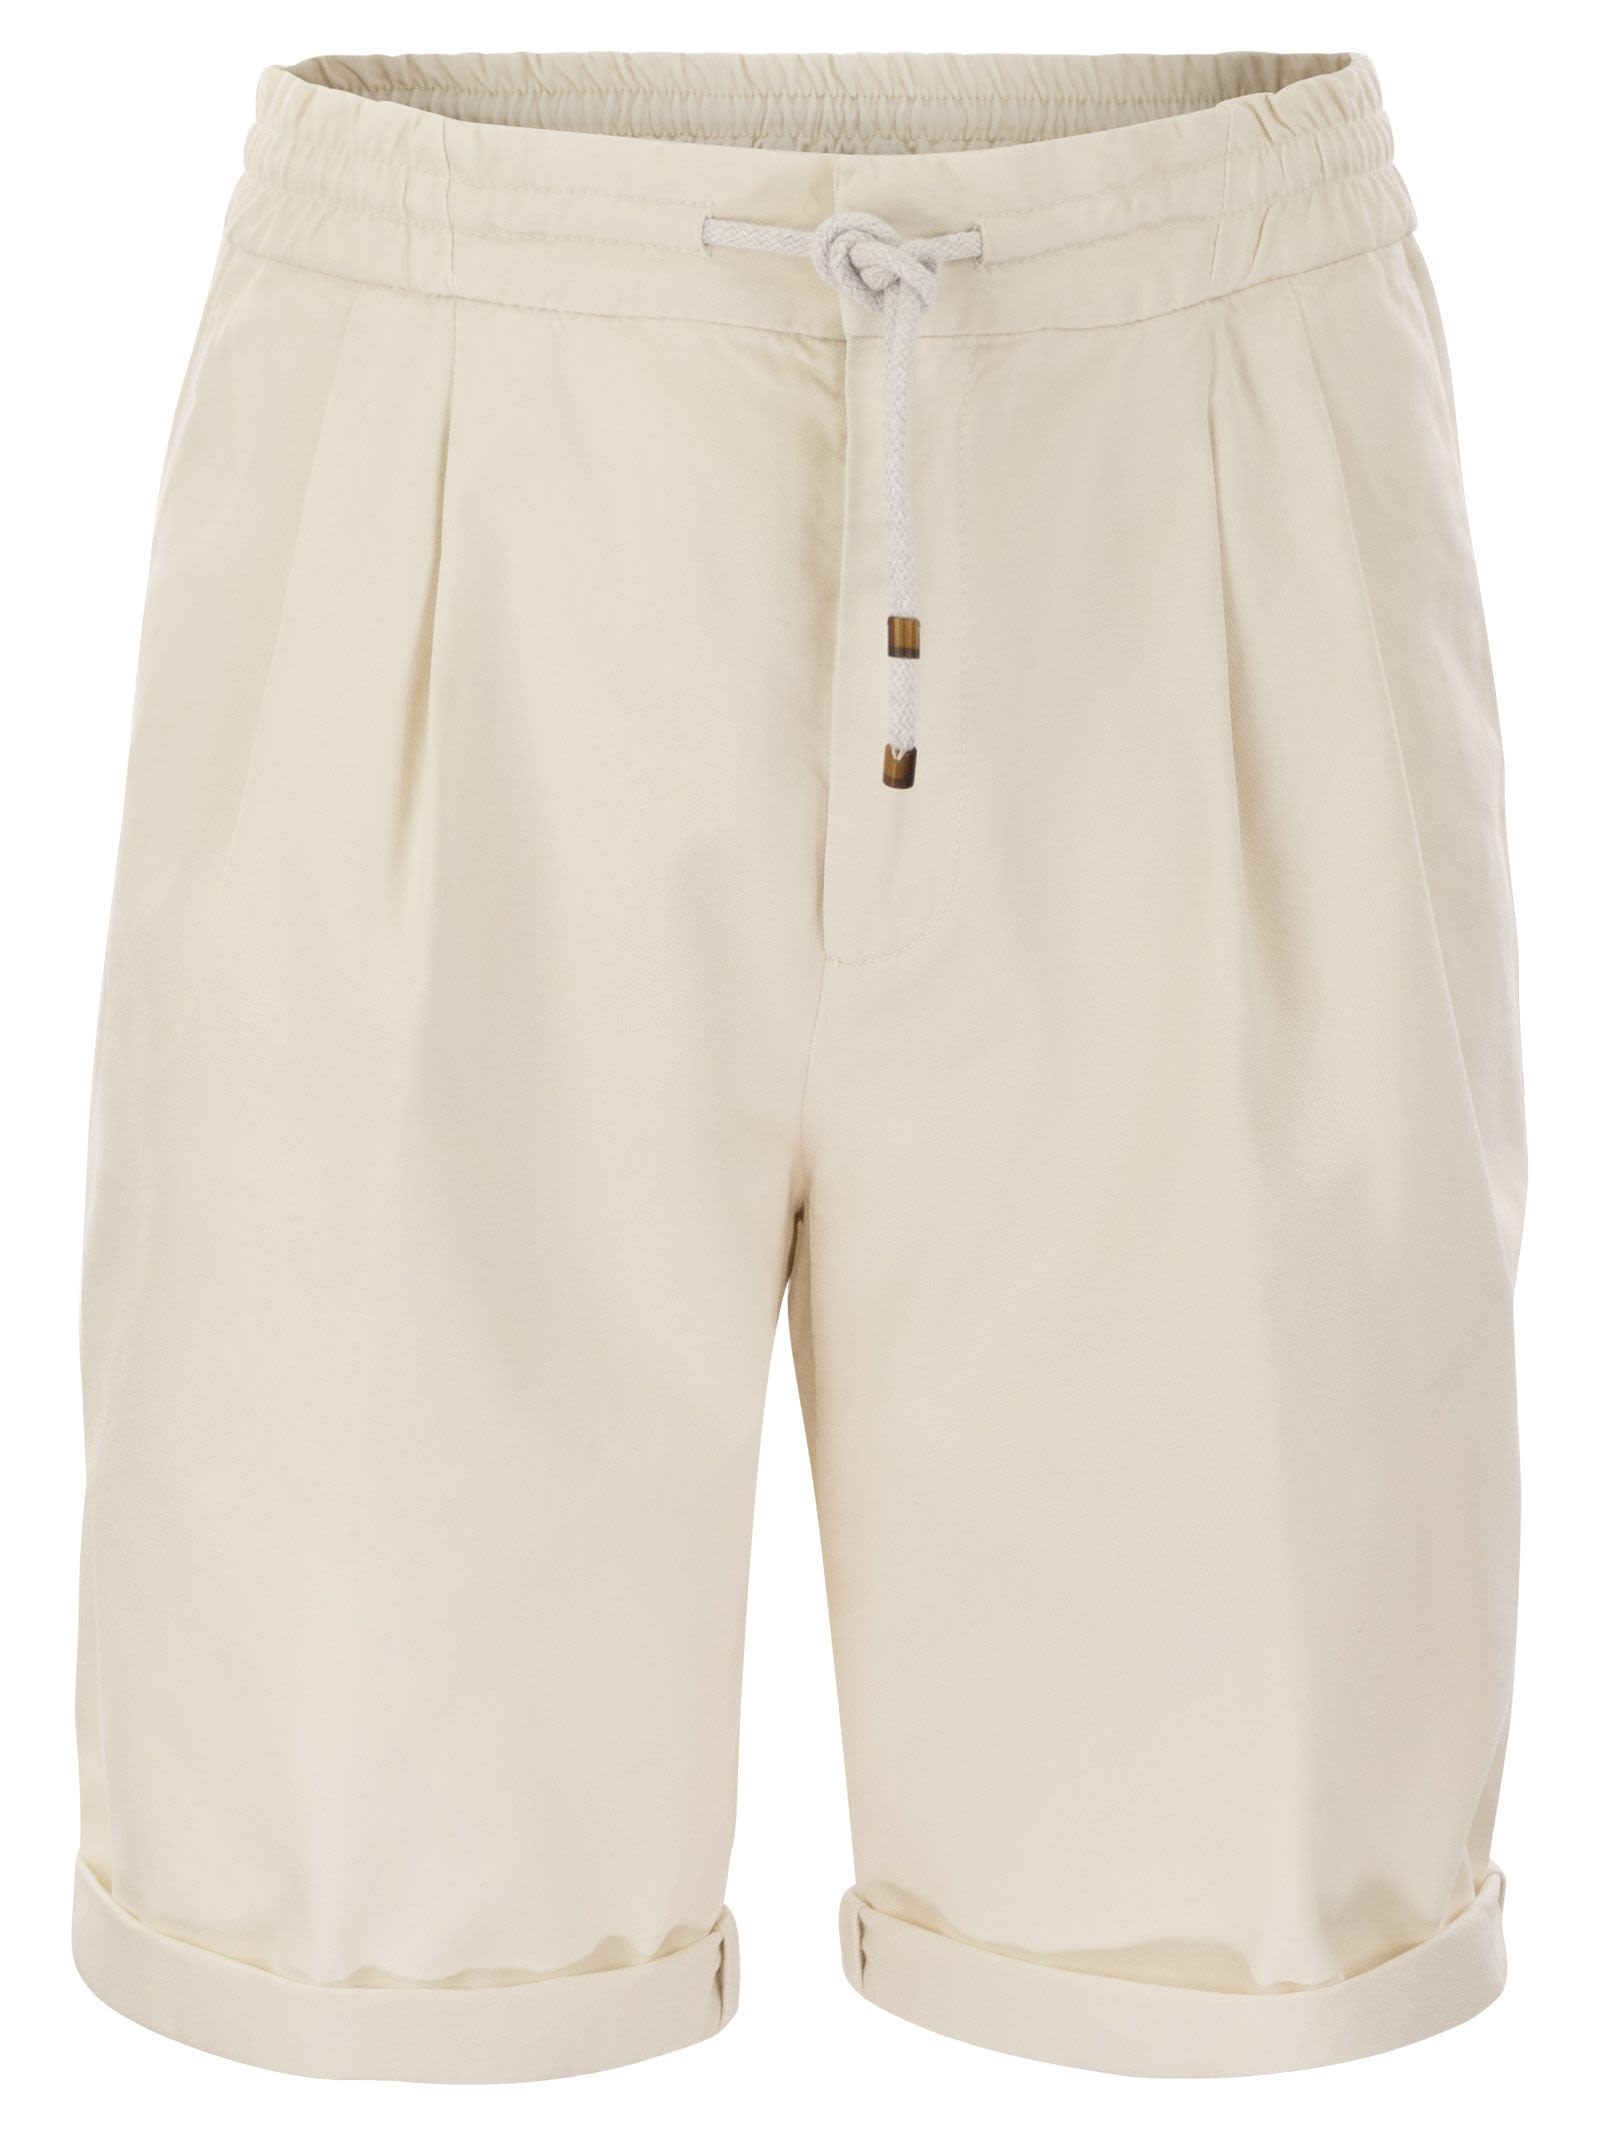 Bermuda Shorts In Garment-dyed Cotton Gabardine With Drawstring And Double Darts